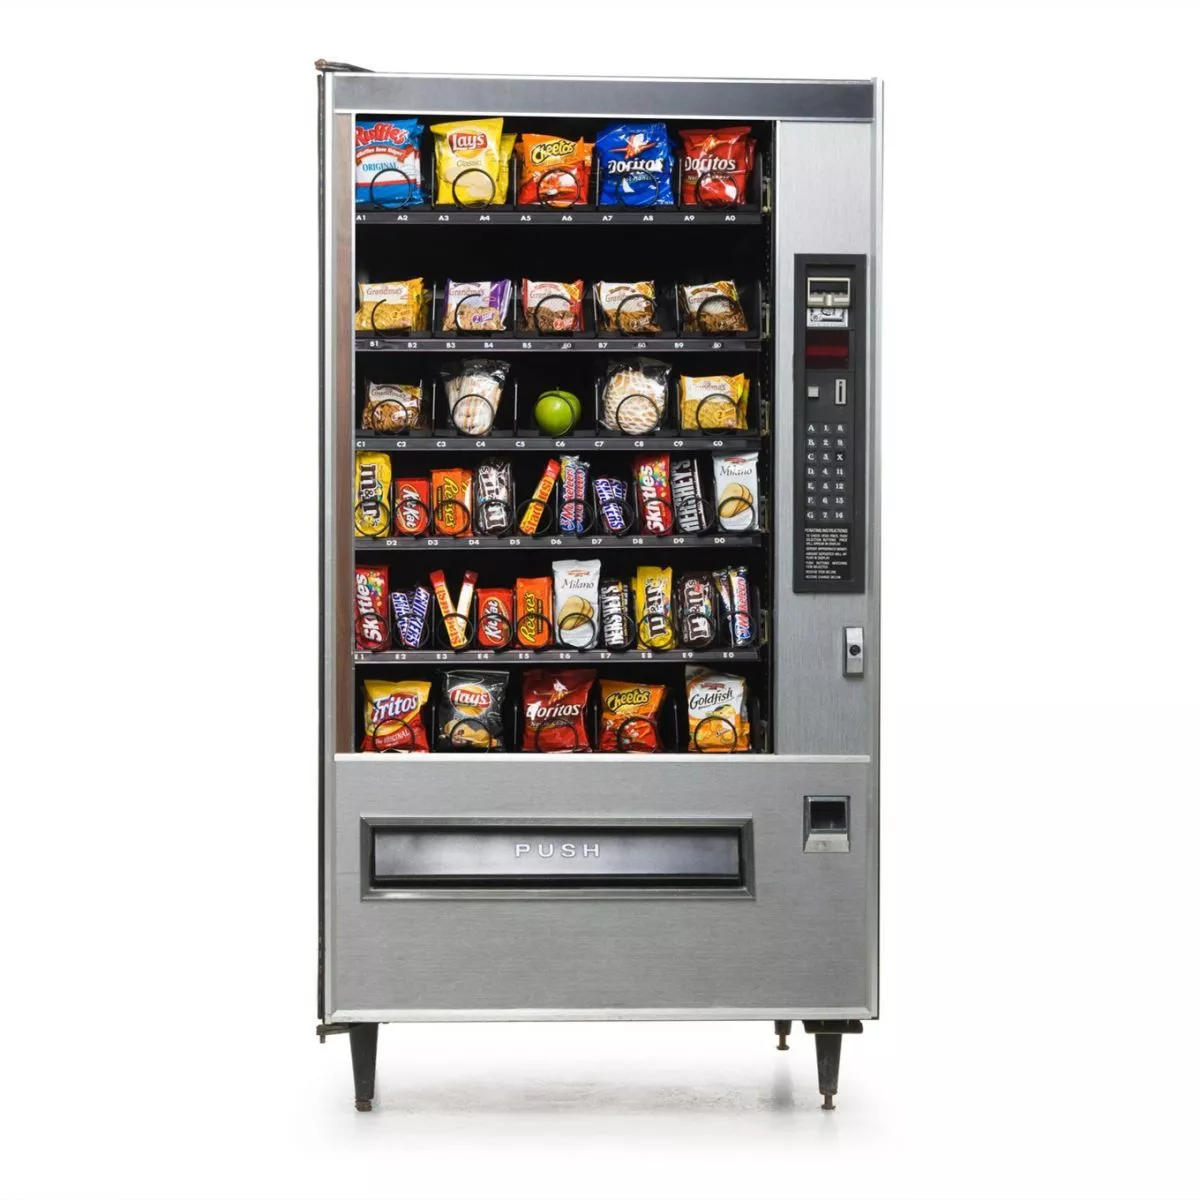 How to Protect the Safety of Vending Machines?